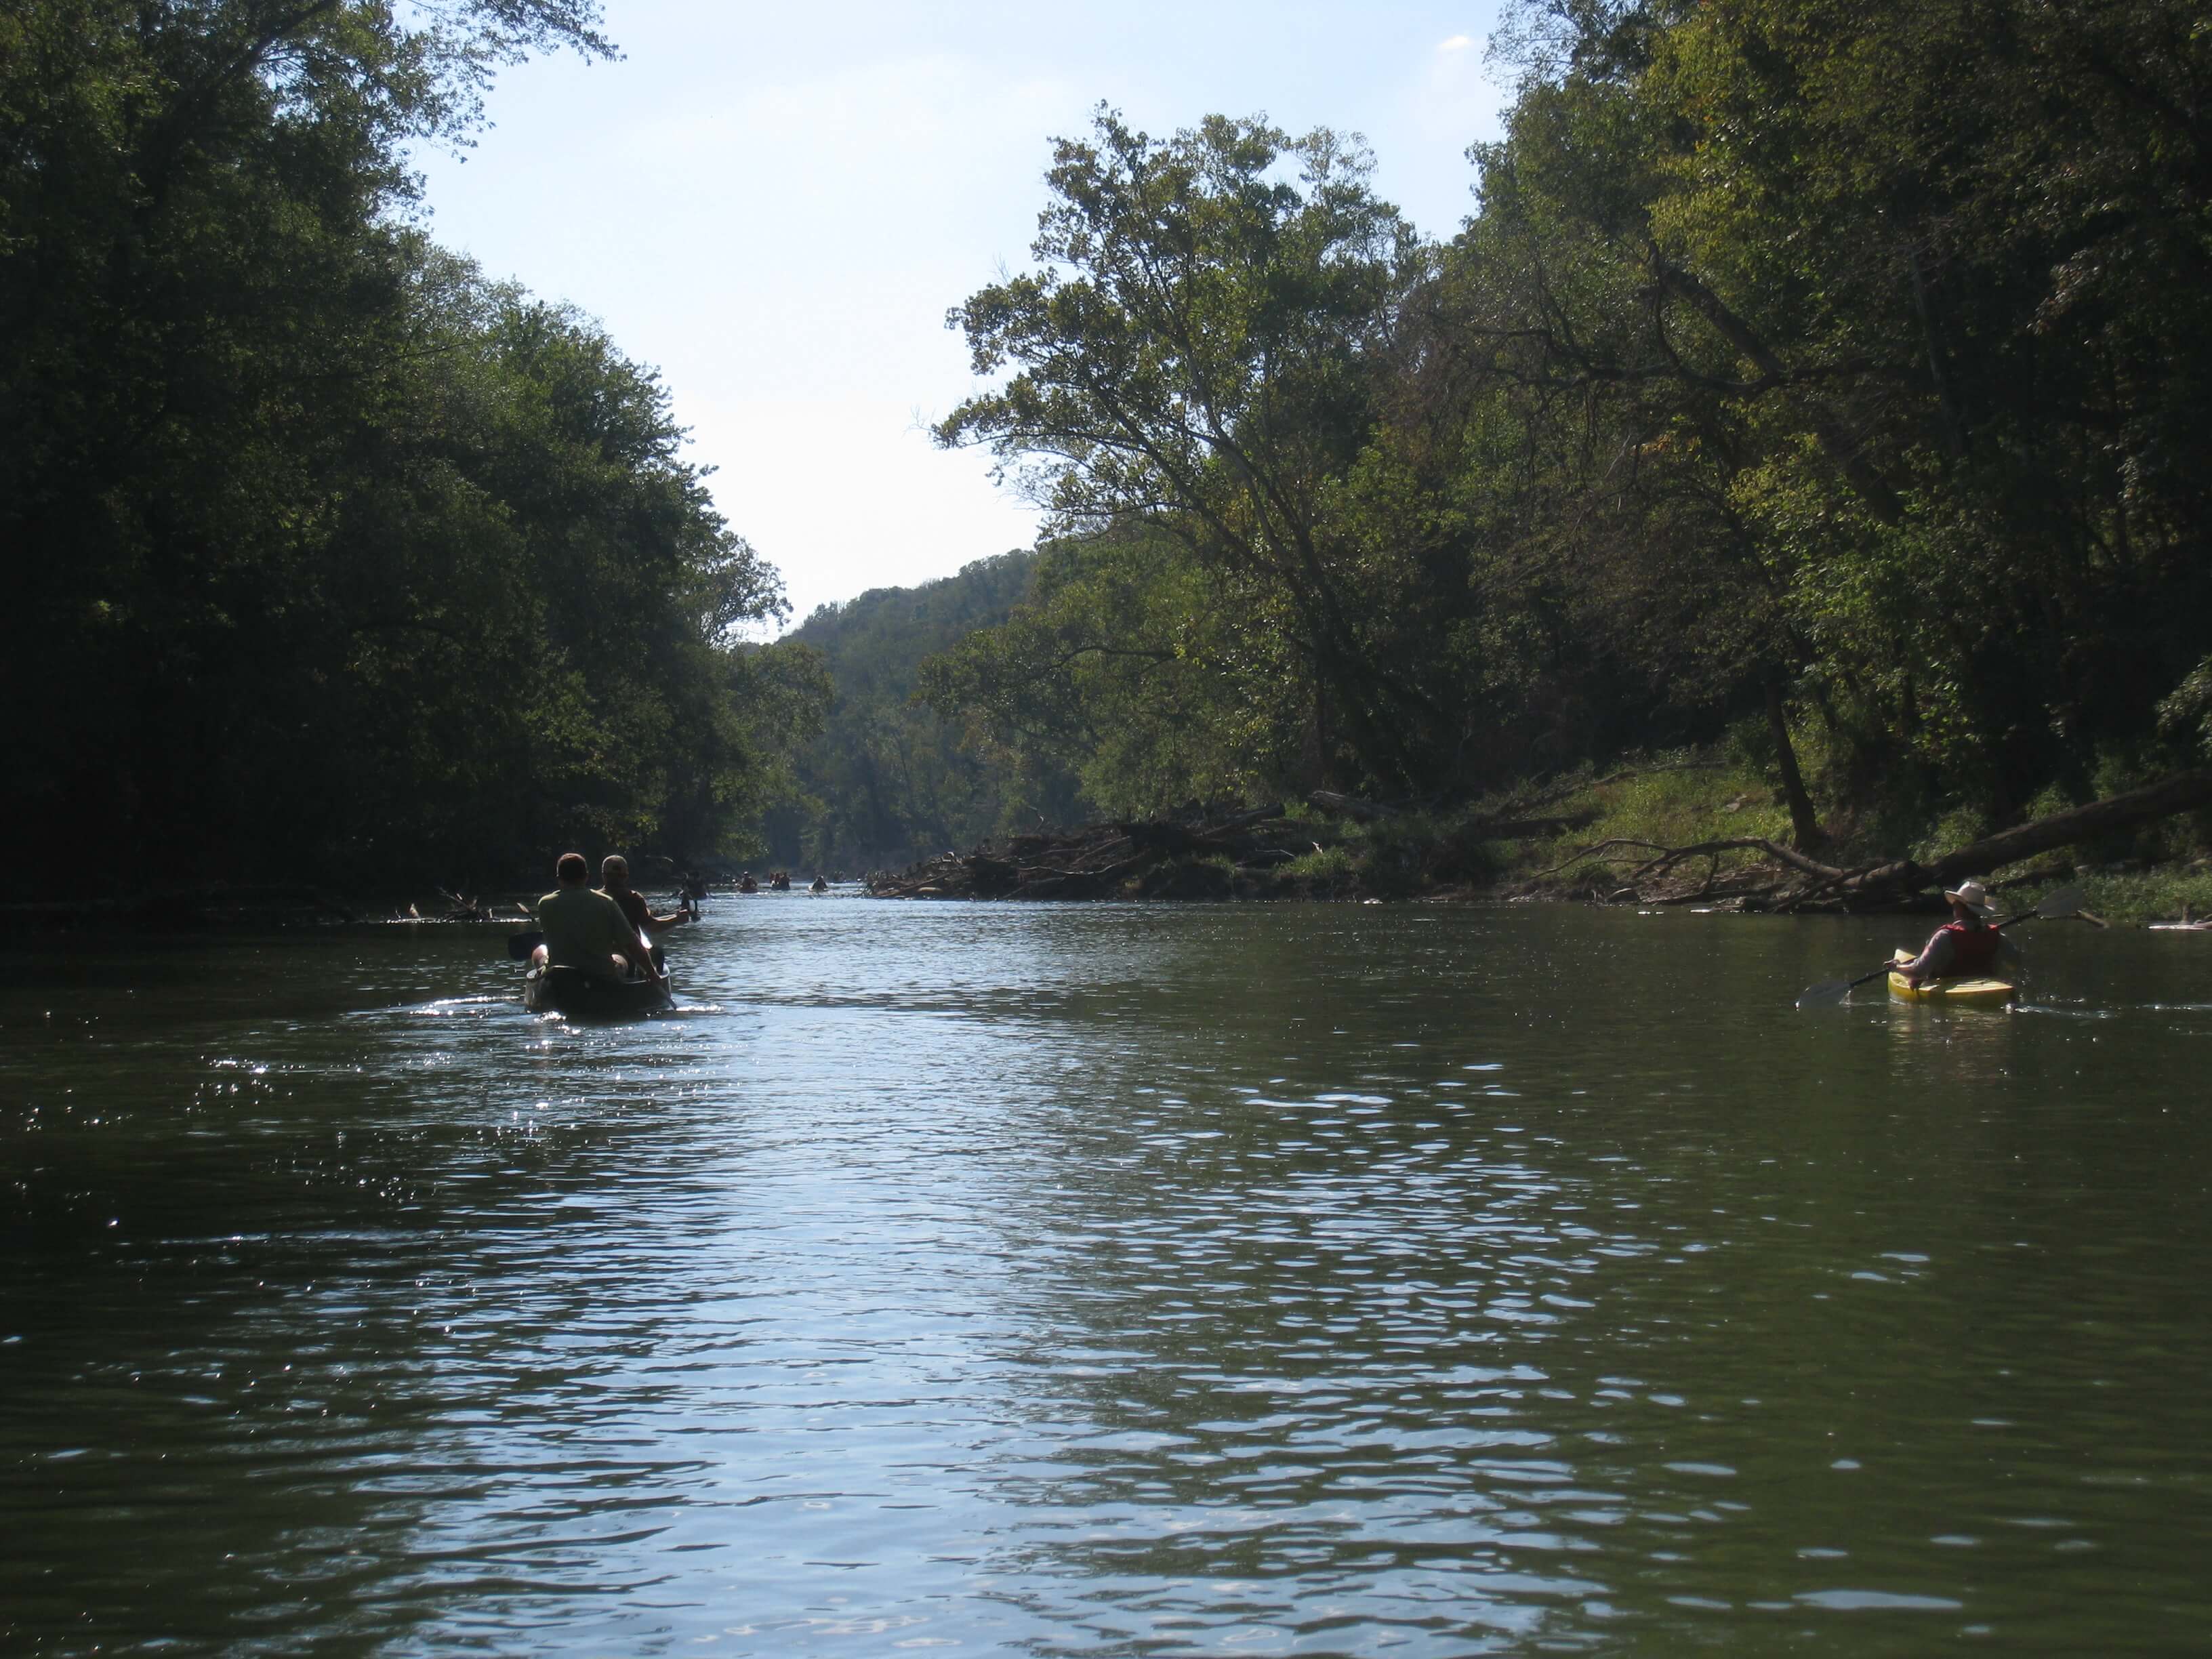 Paddlers explore Green River below Green River Dam.  The river is rich in biodiversity and provides excellent opportunities for people to enjoy nature as it flows past several downstream human communities, through Mammoth Cave National Park, and on to its confluence with the Ohio River.